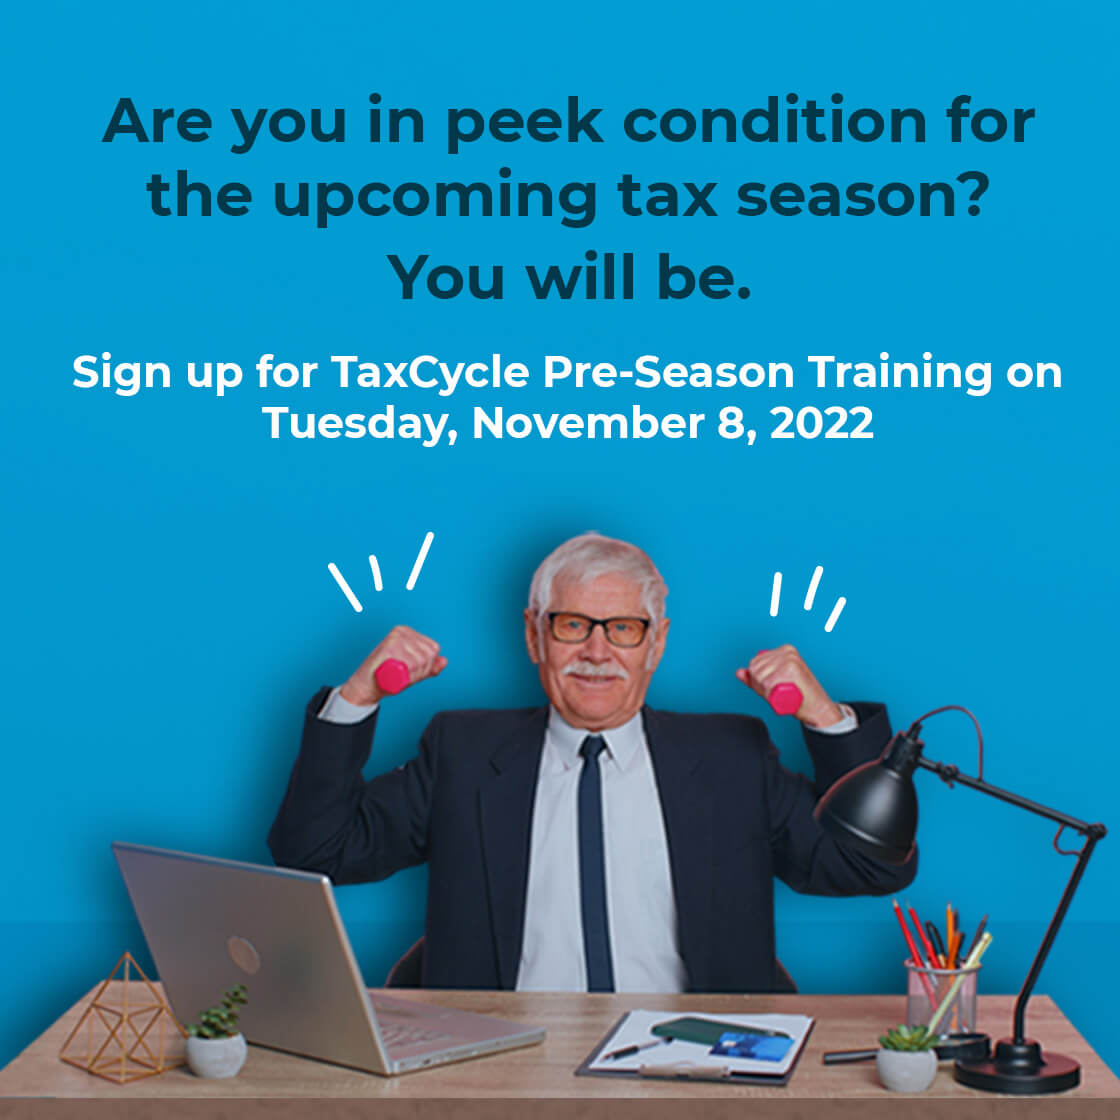 Sign up for the TaxCycle Pre-Season Training on Tuesday, November 8, 2022